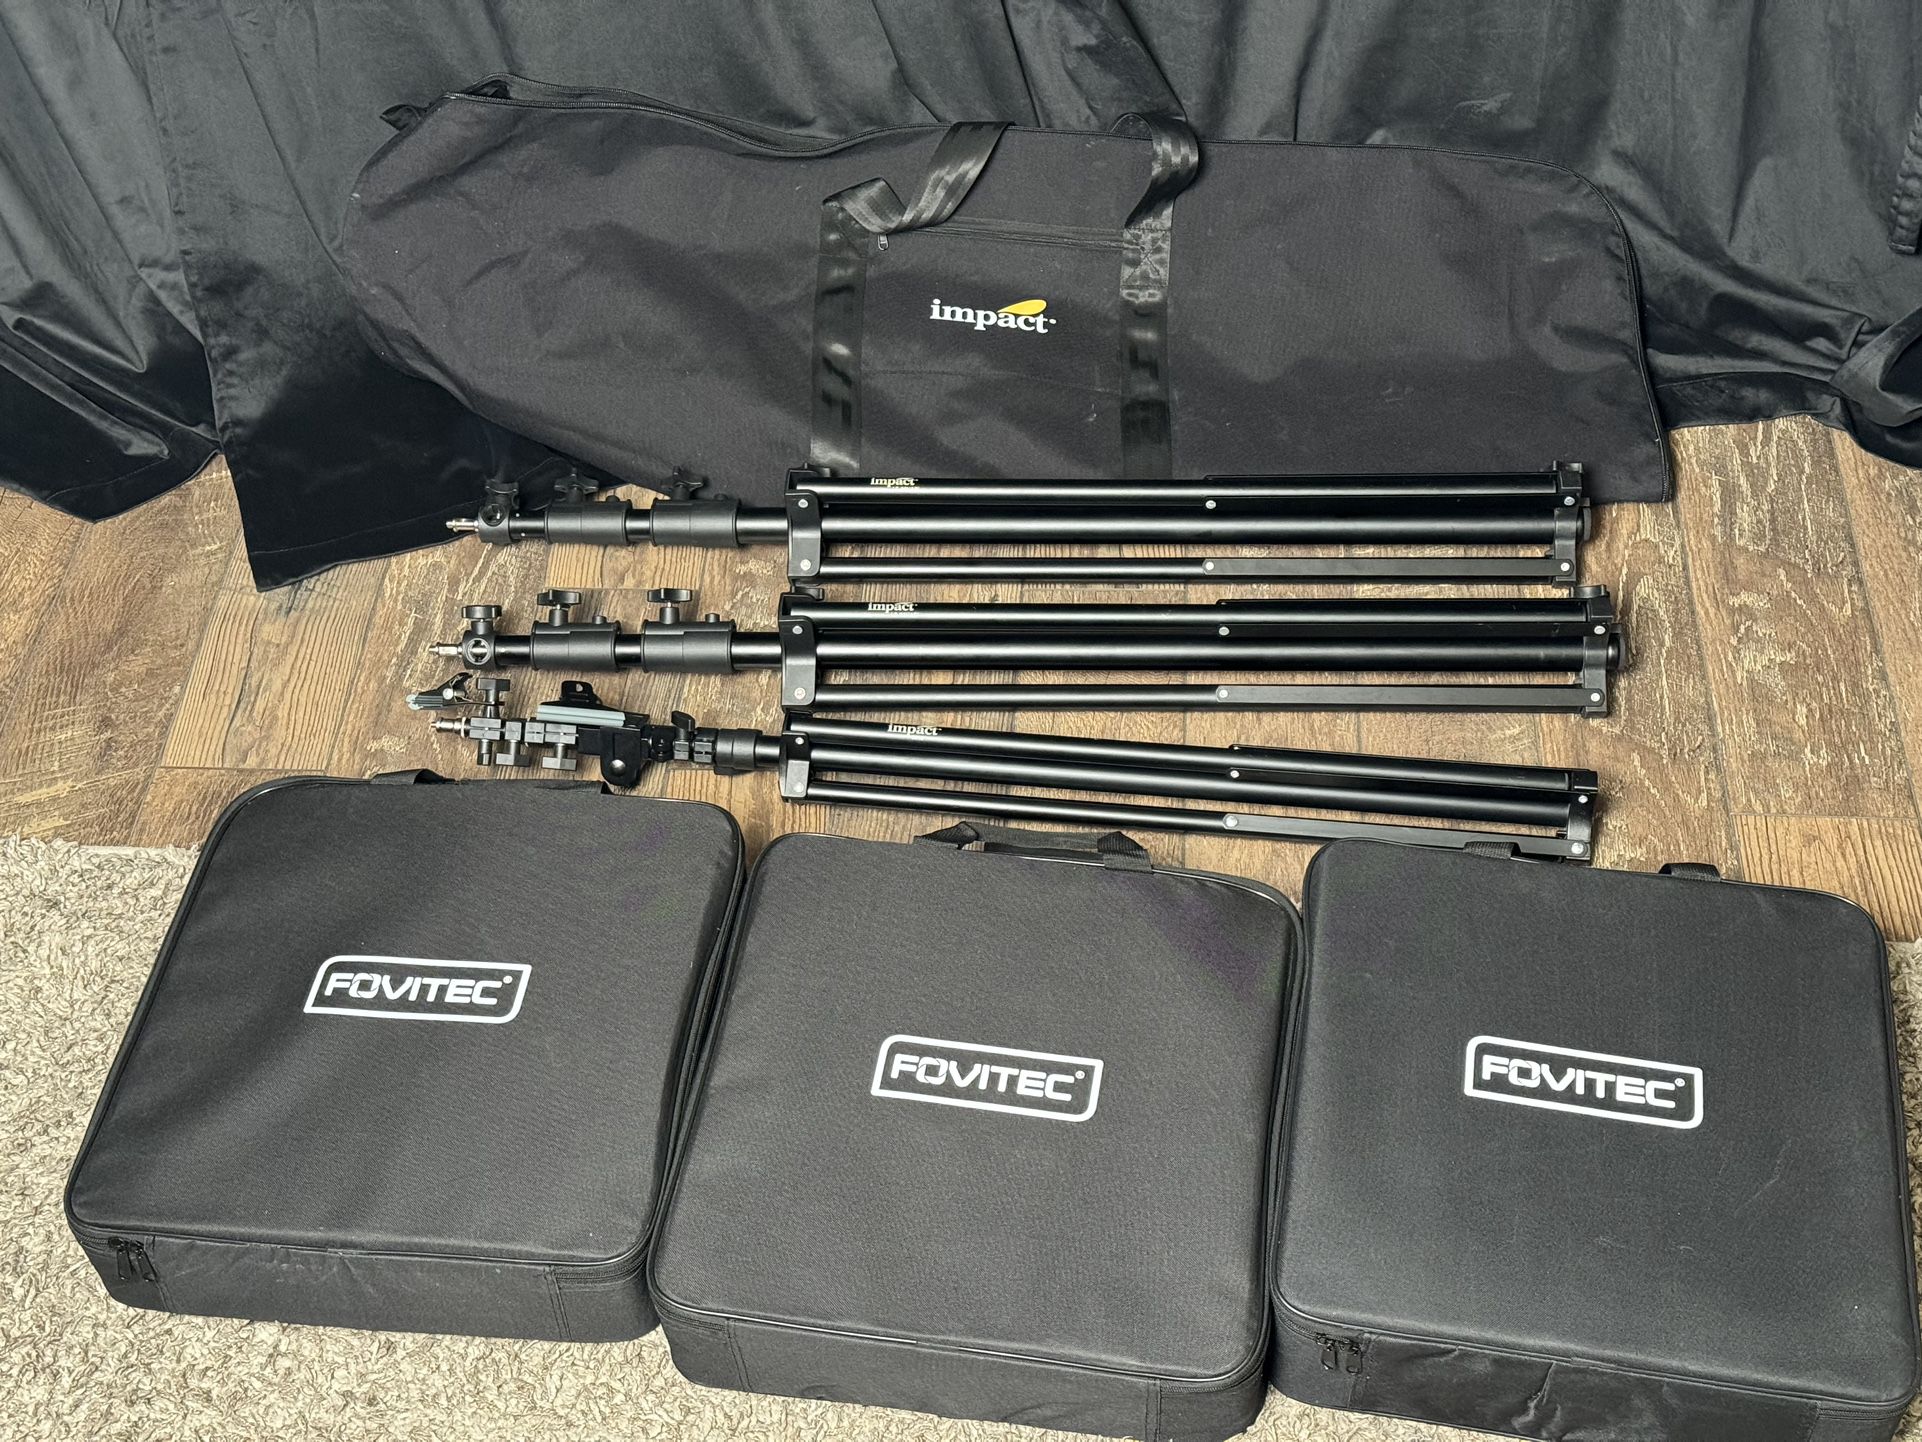 Fovitec 3 LED Video Light Setup with Stands and Carrying Bag